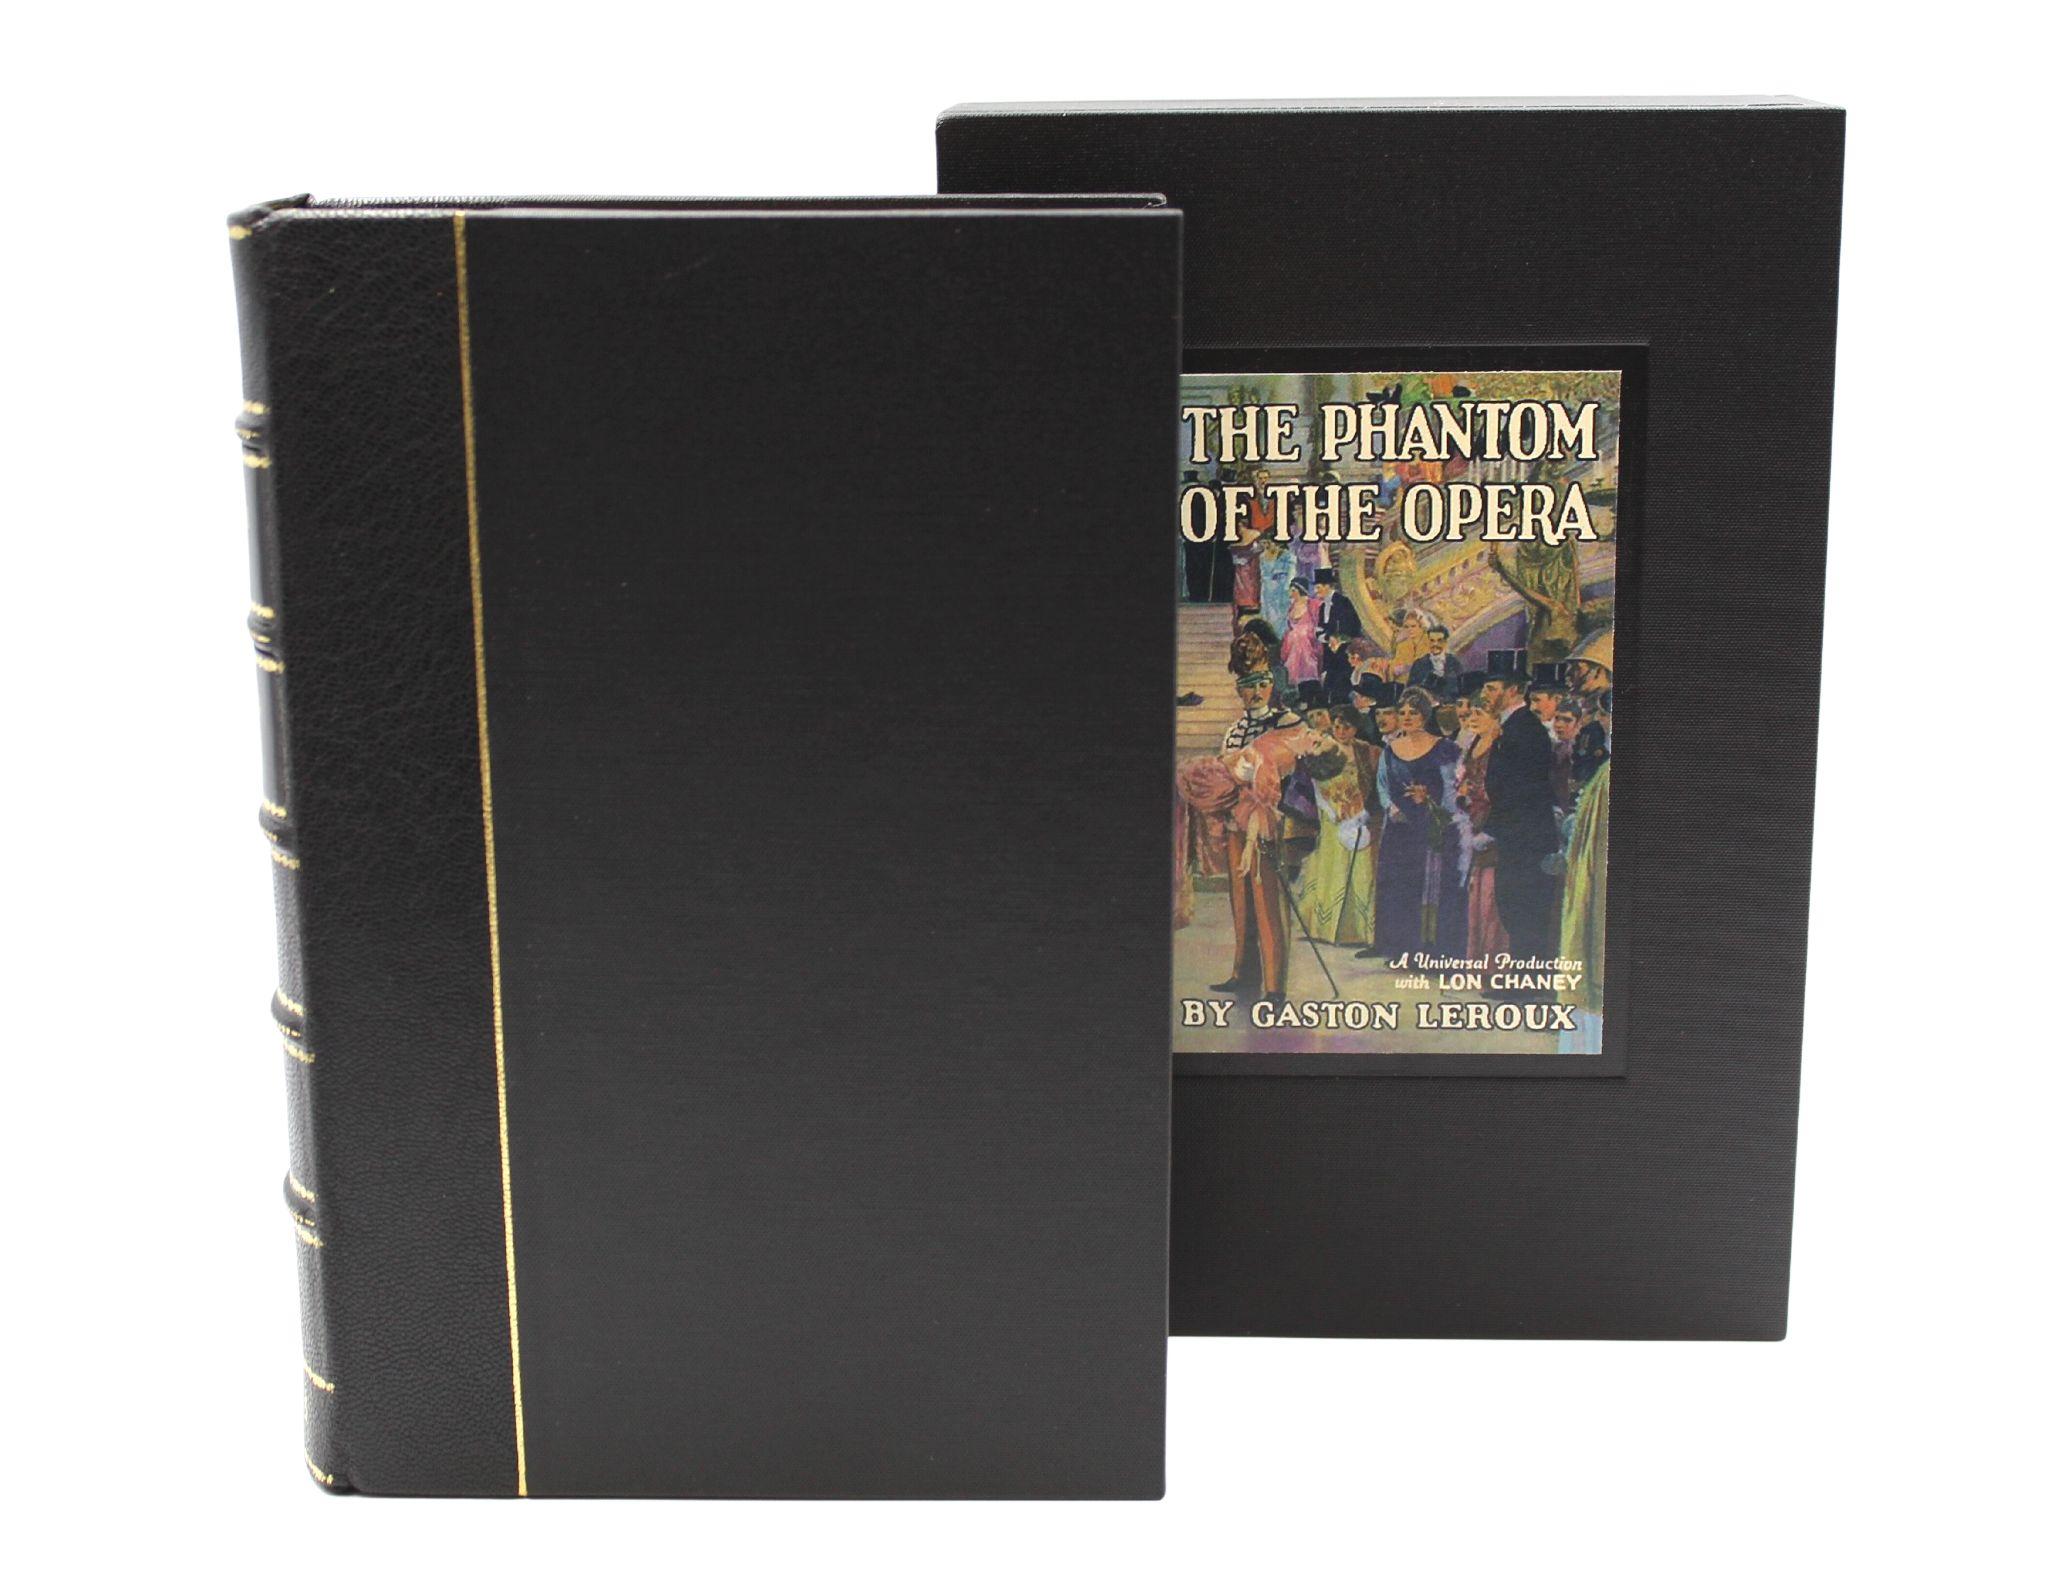 Leroux, Gaston.  The Phantom of the Opera. New York: Grosset & Dunlap, [1925]. Illustrated by Andre Castaigne. Signed by actress Carla Laemmle. 8vo. Rebound in black 1/.4 leather and cloth boards, with raised bands, gilt stamps, and gilt titles to